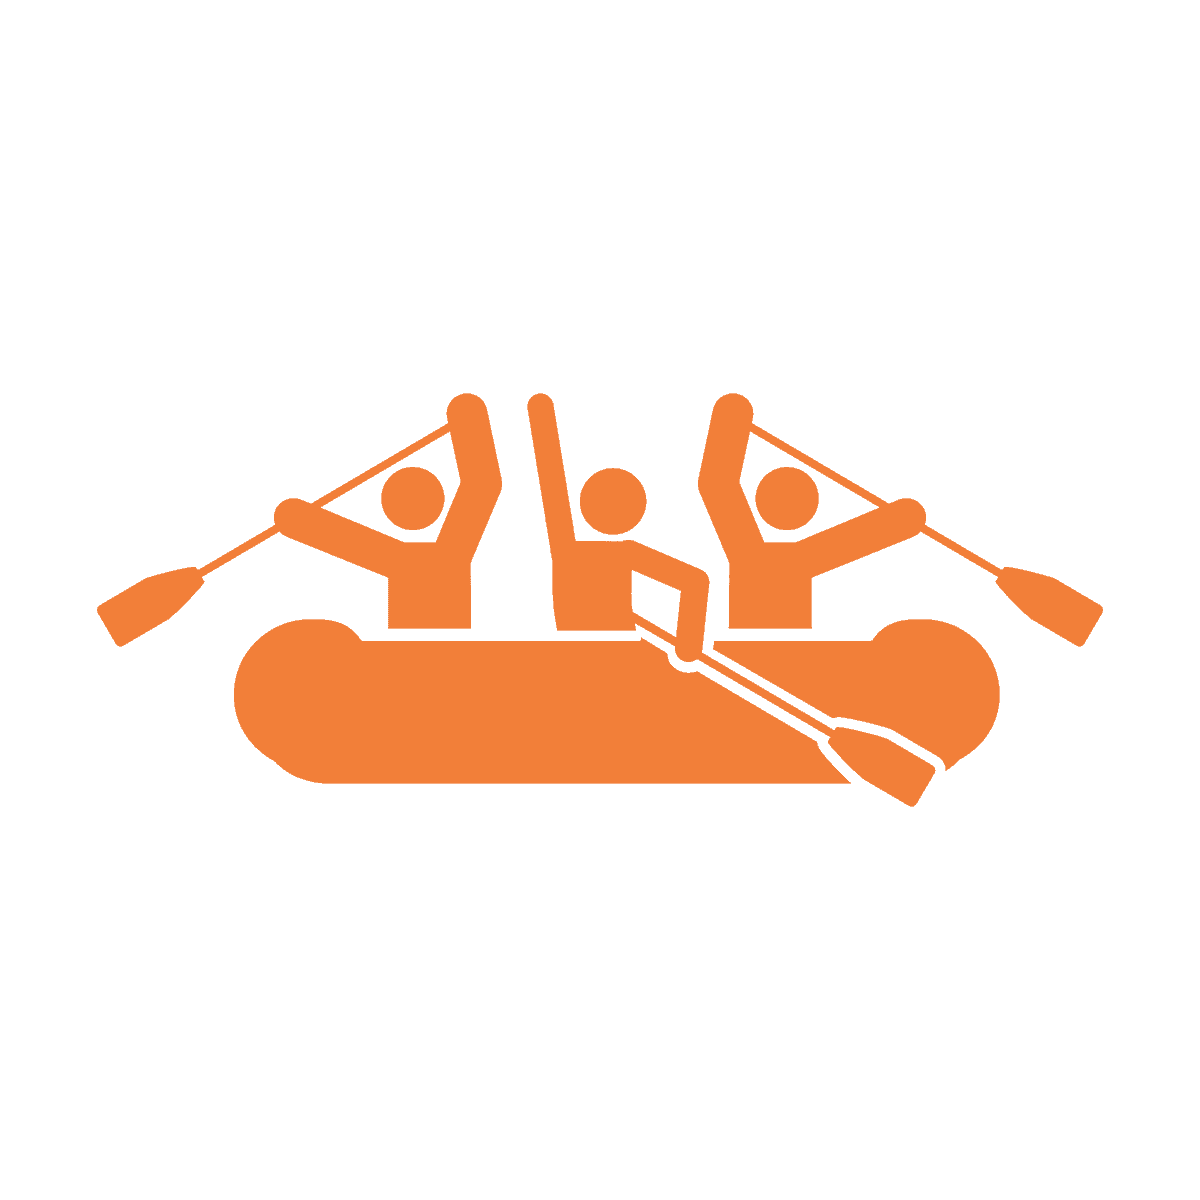 icon showing three people rafting using oars